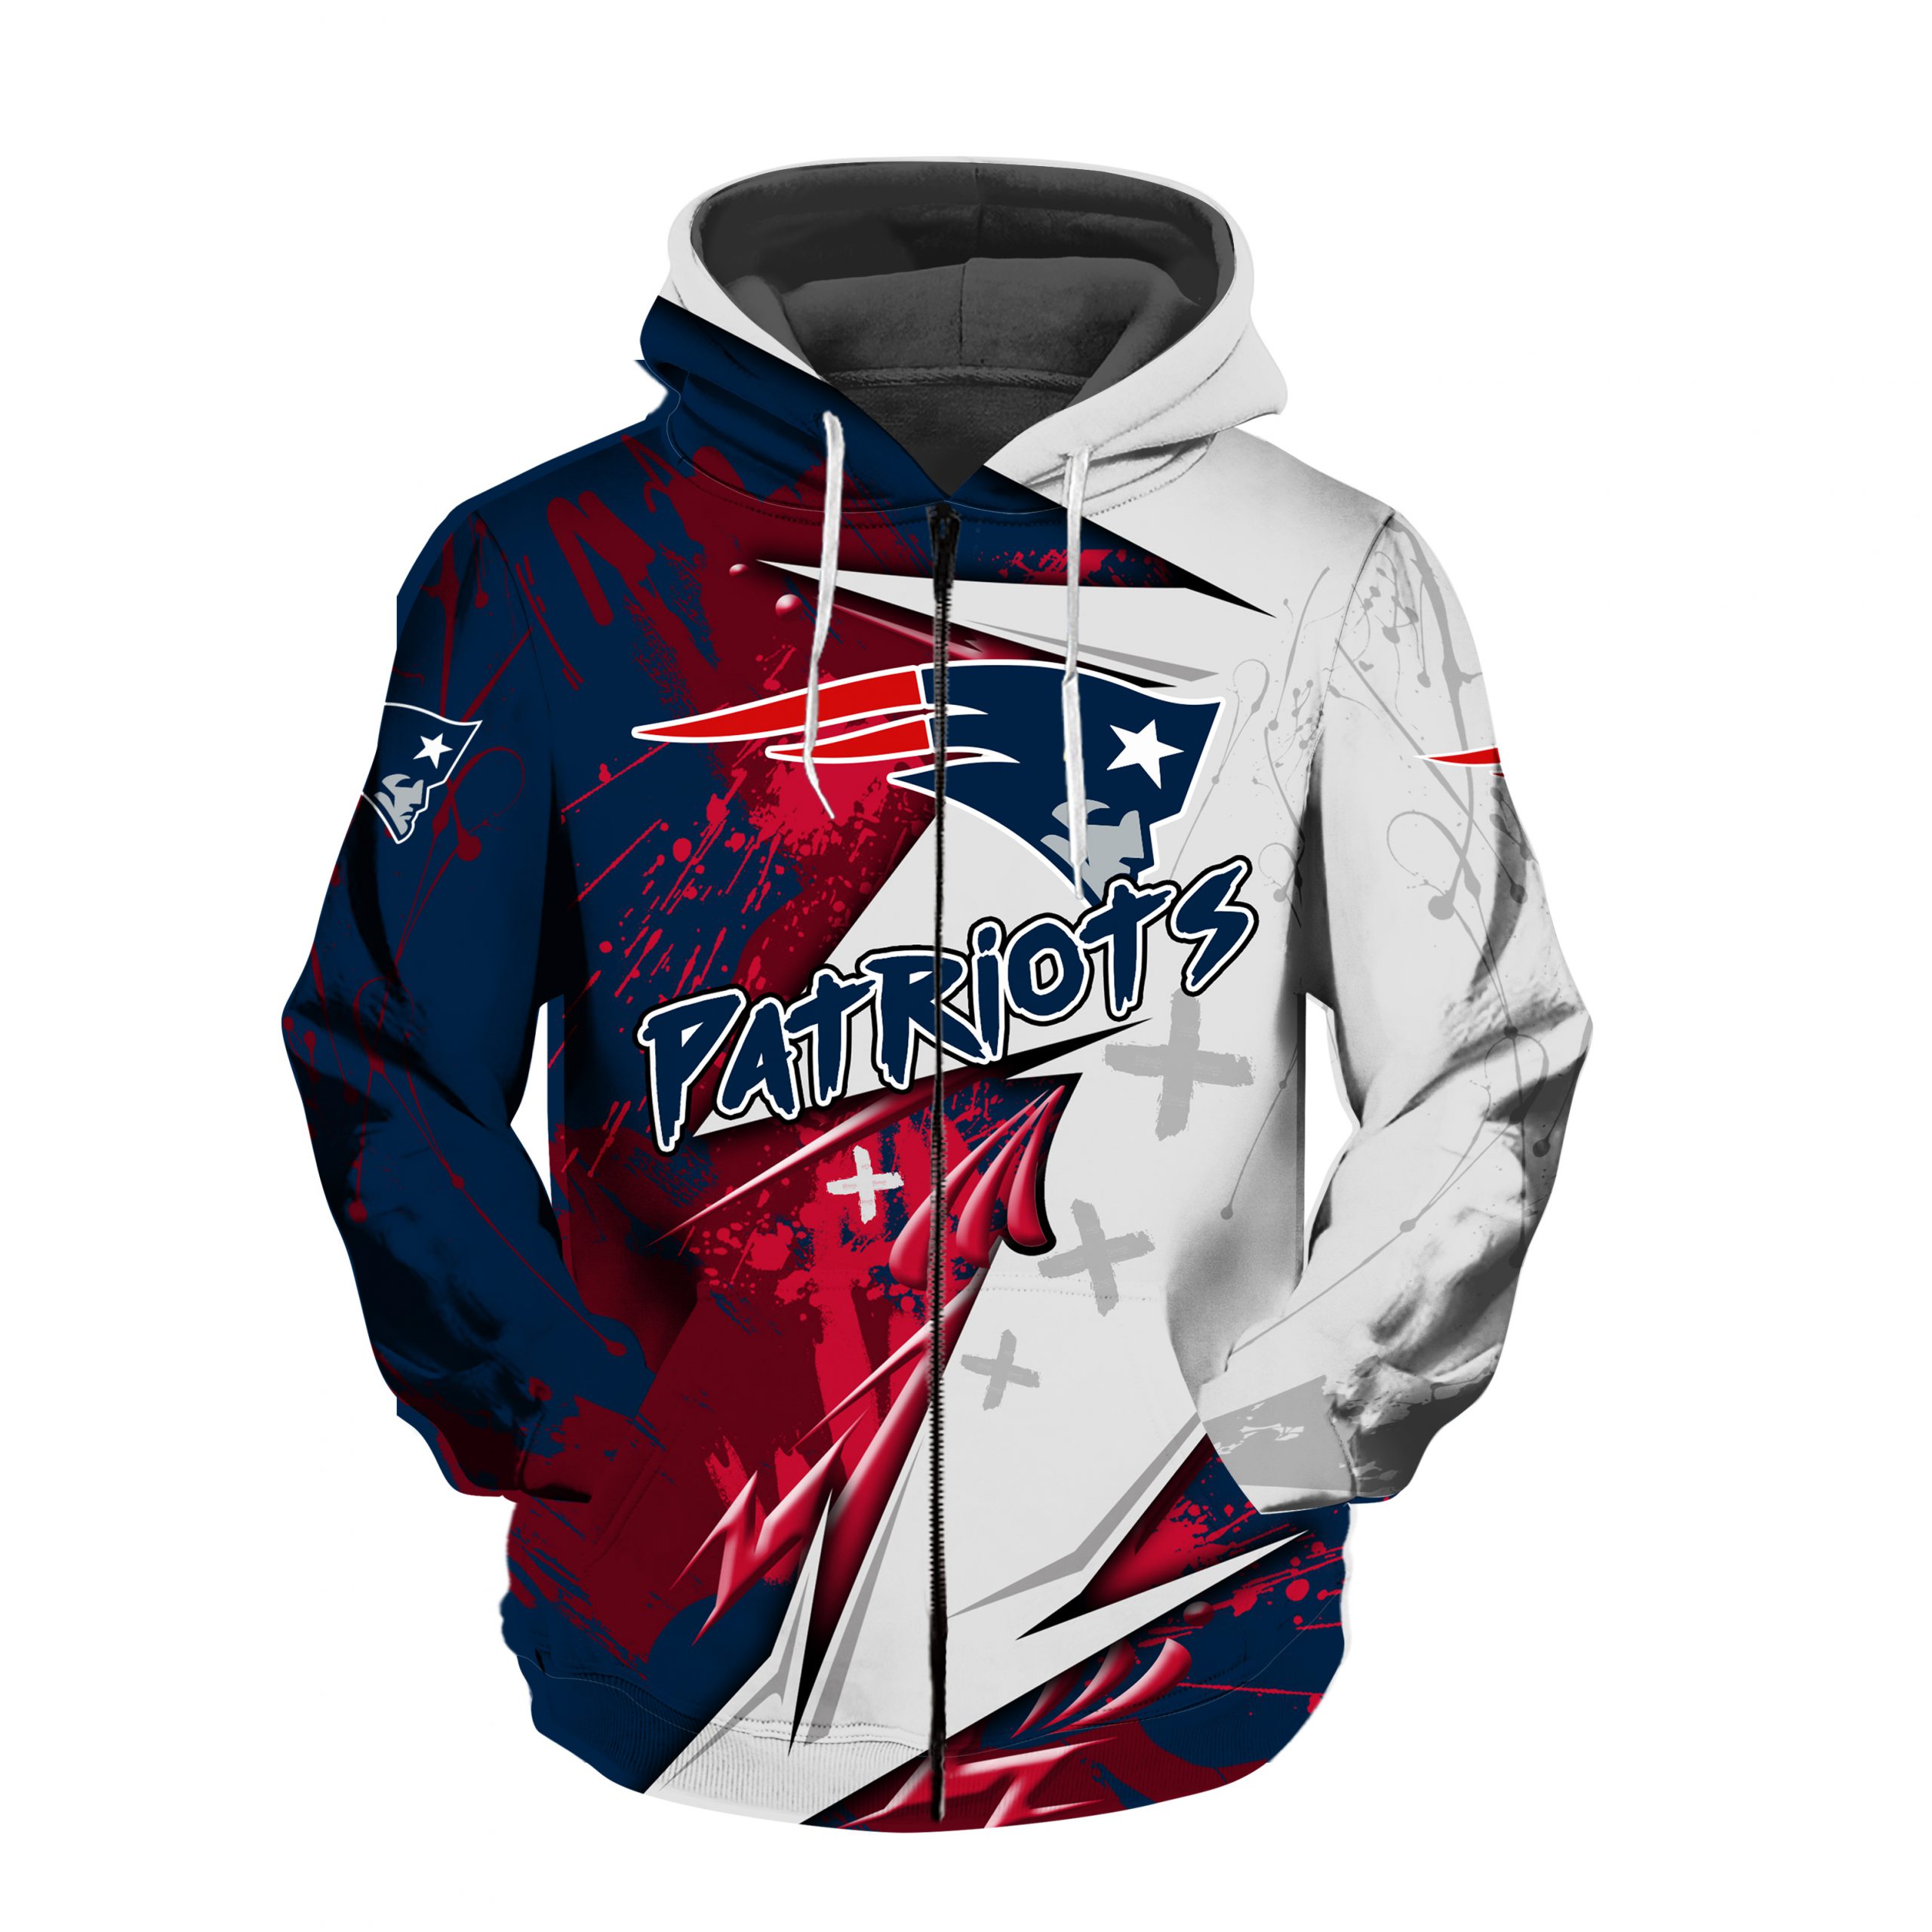 NFL new england patriots all over printed zip hoodie